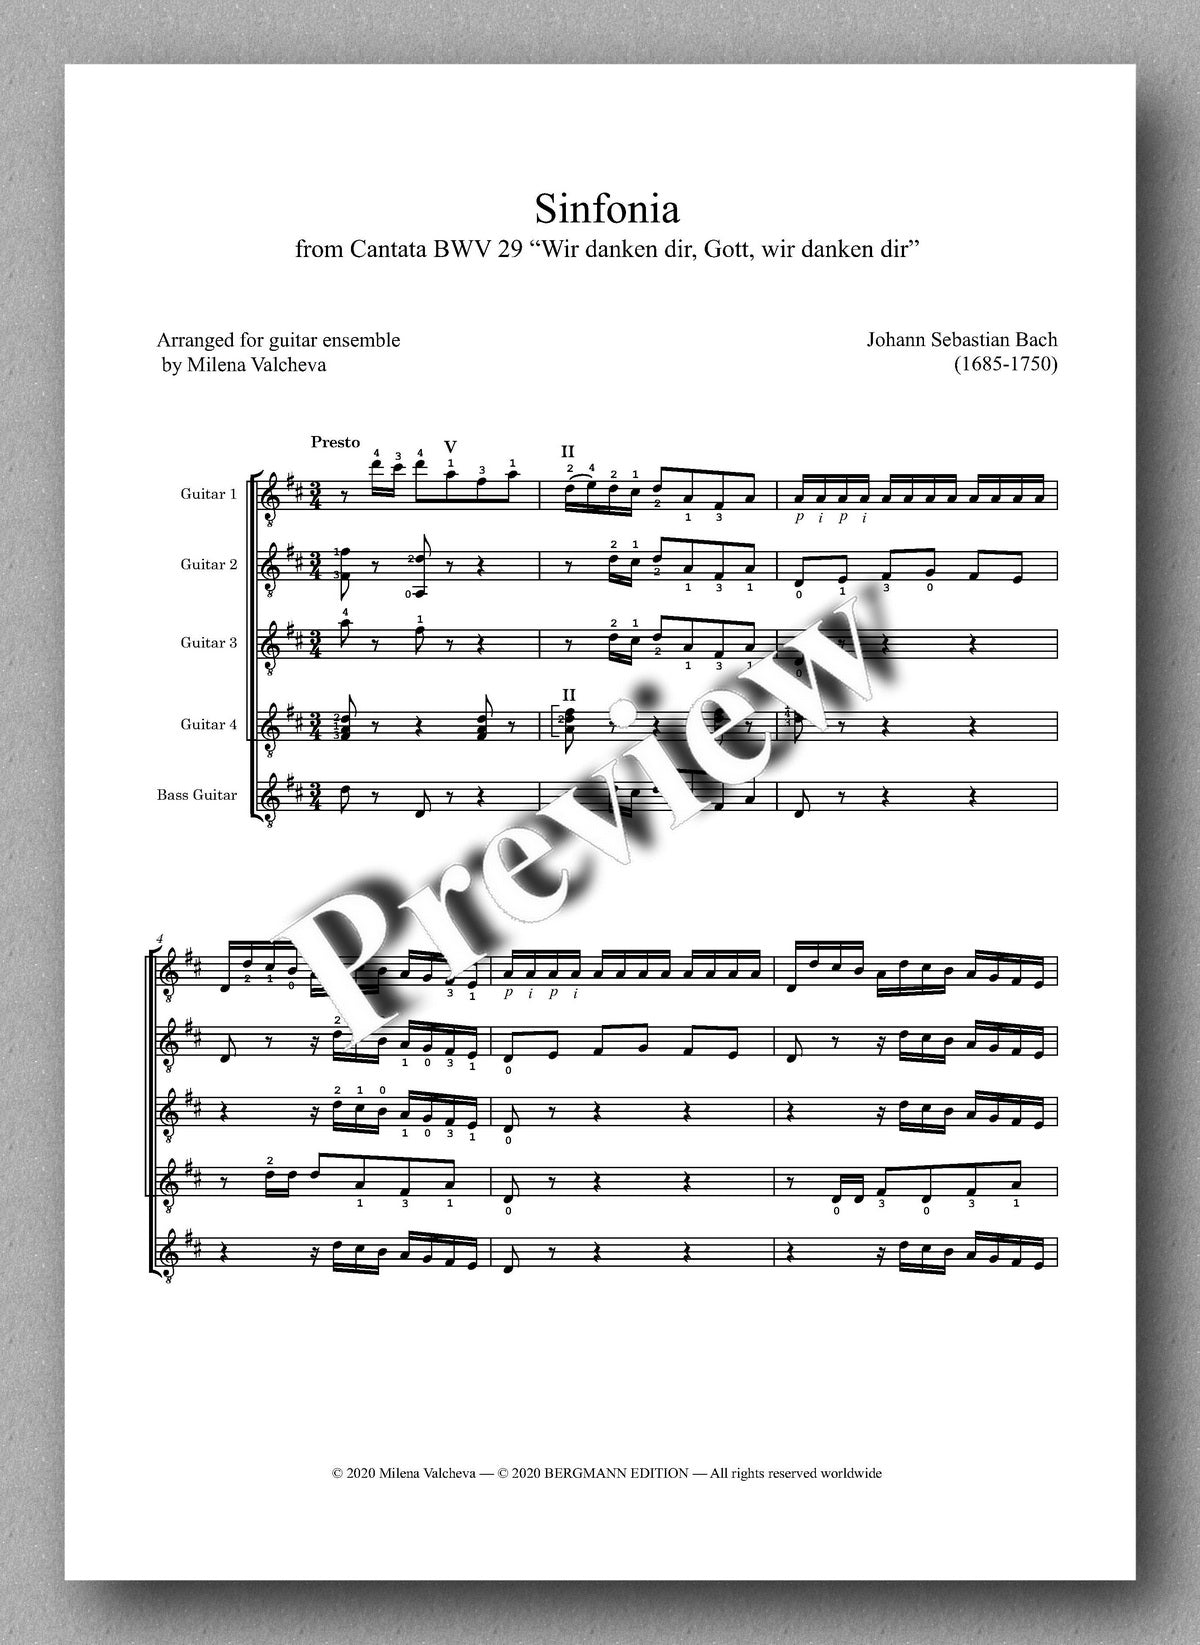 J.S. Bach, Sinfonia - preview of the music score 1